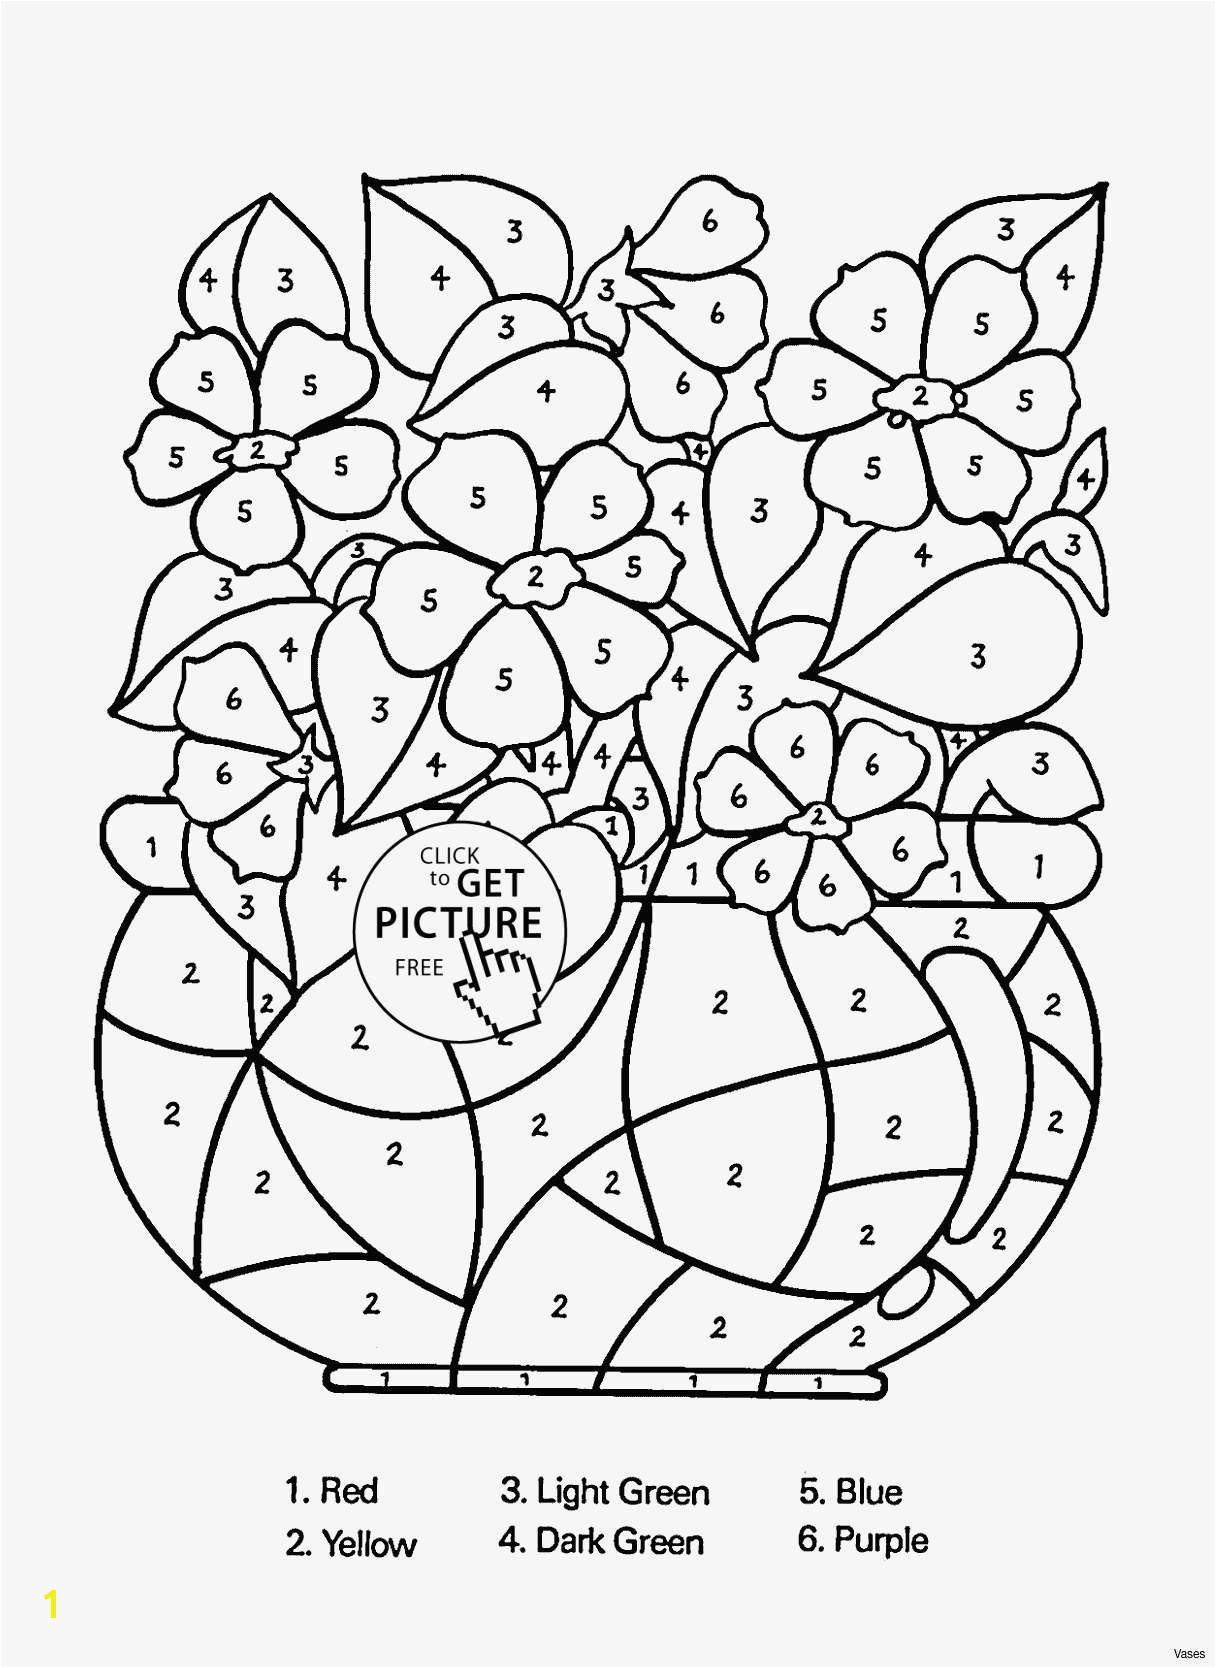 Free Printable Disney Christmas Coloring Pages Cool Coloring Pages Printable New Printable Cds 0d Coloring Pages